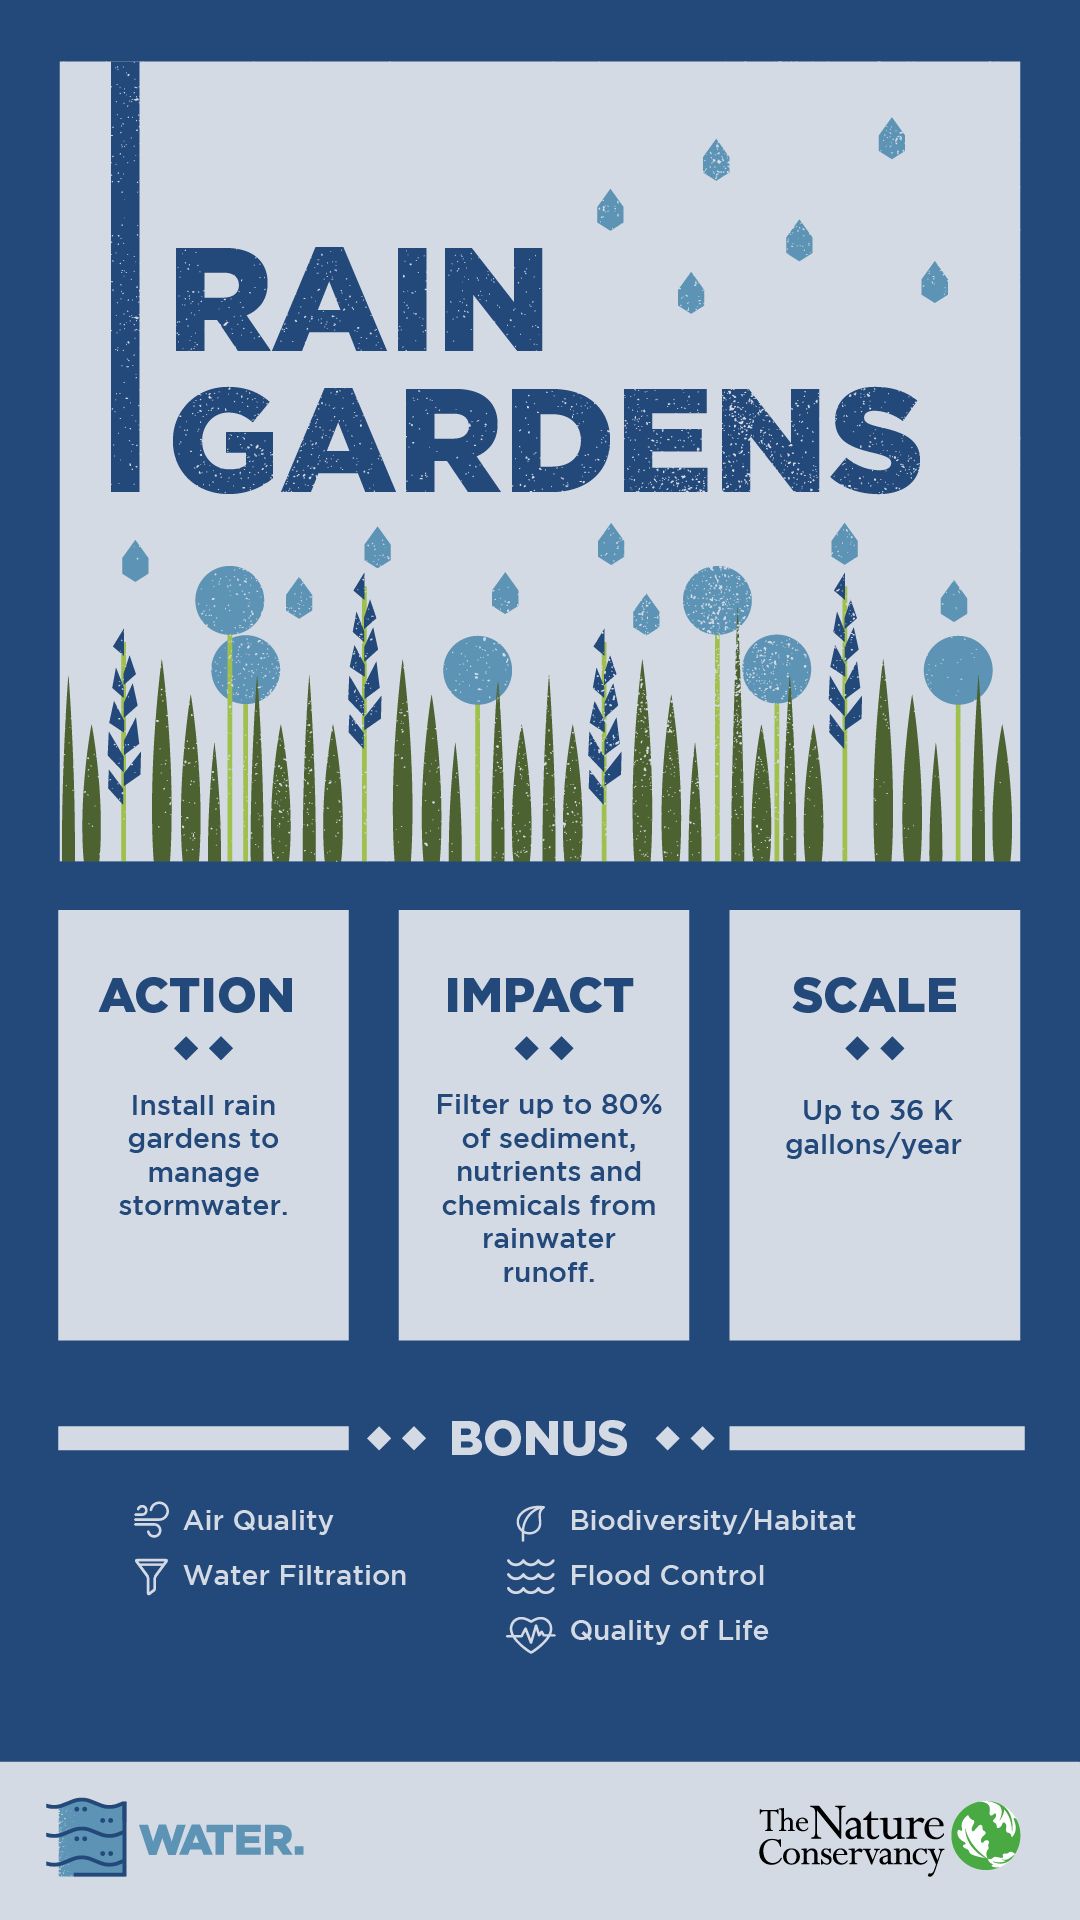 Rain gardens, which are installed/planted to manage stormwater, can filter up to 80% of pollution from rainwater runoff with the average garden filtering up to 36,000 gallons of water per year.